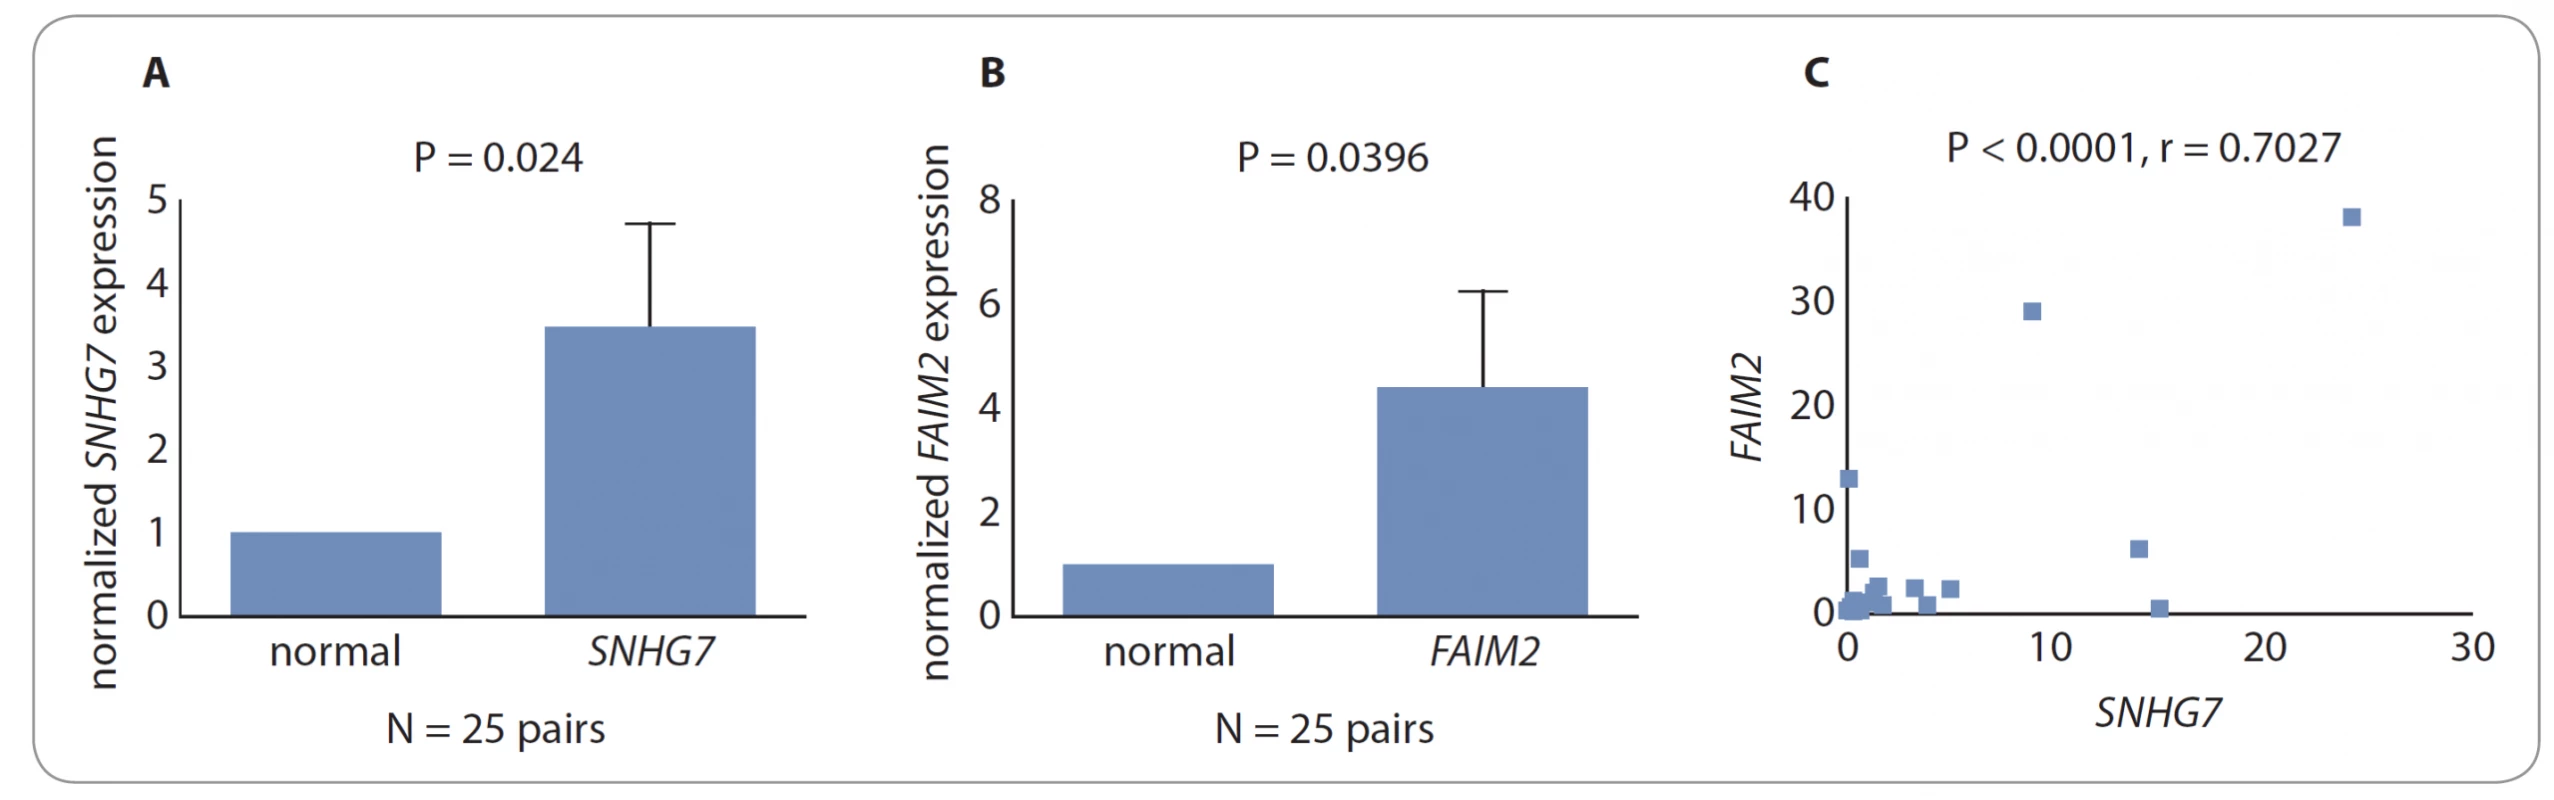 Comparison between normalized expression levels of the desired genes. A) SNHG7 was highly expressed in CRC tissues compared
with adjacent normal tissues. B) The FAIM2 gene in the tumor samples showed a higher expression than the normal tissues.
C) Change in the expression of FAIM2 and SNHG7 genes indicated a positive correlation between their expression levels.